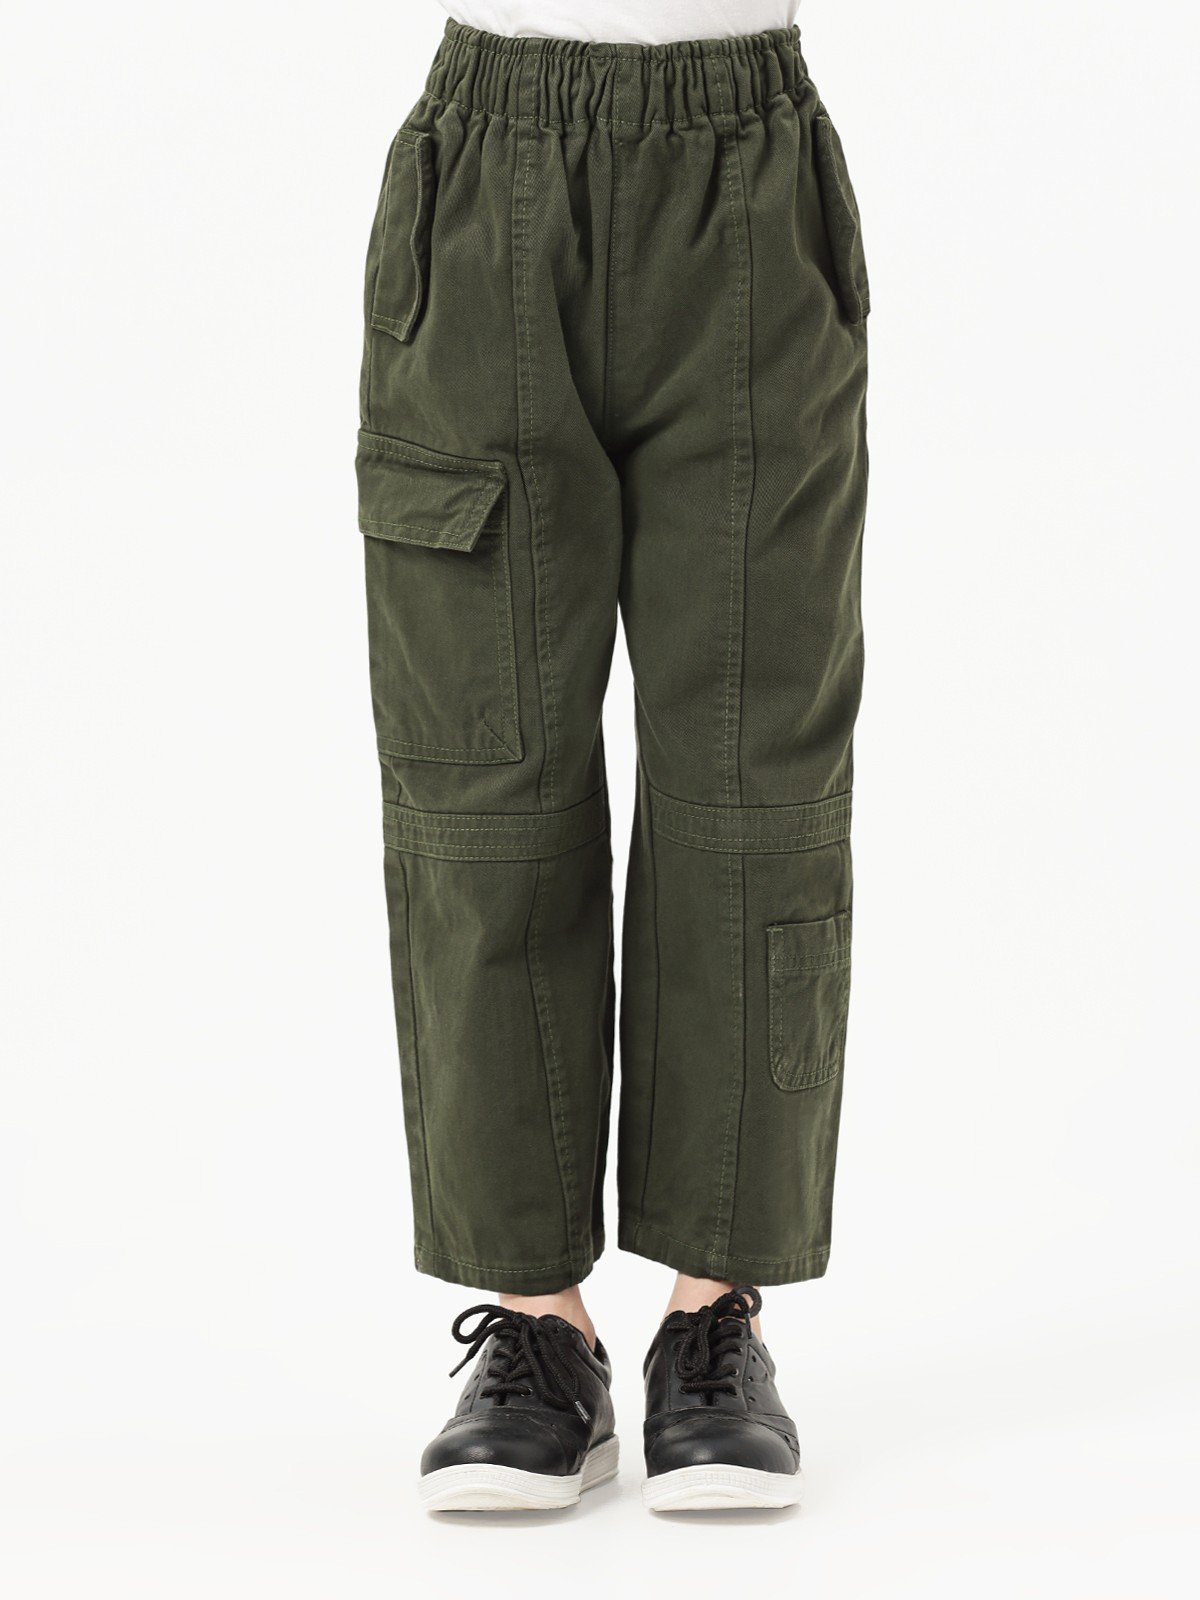 Girl's Green Pant - EGBCP23-001